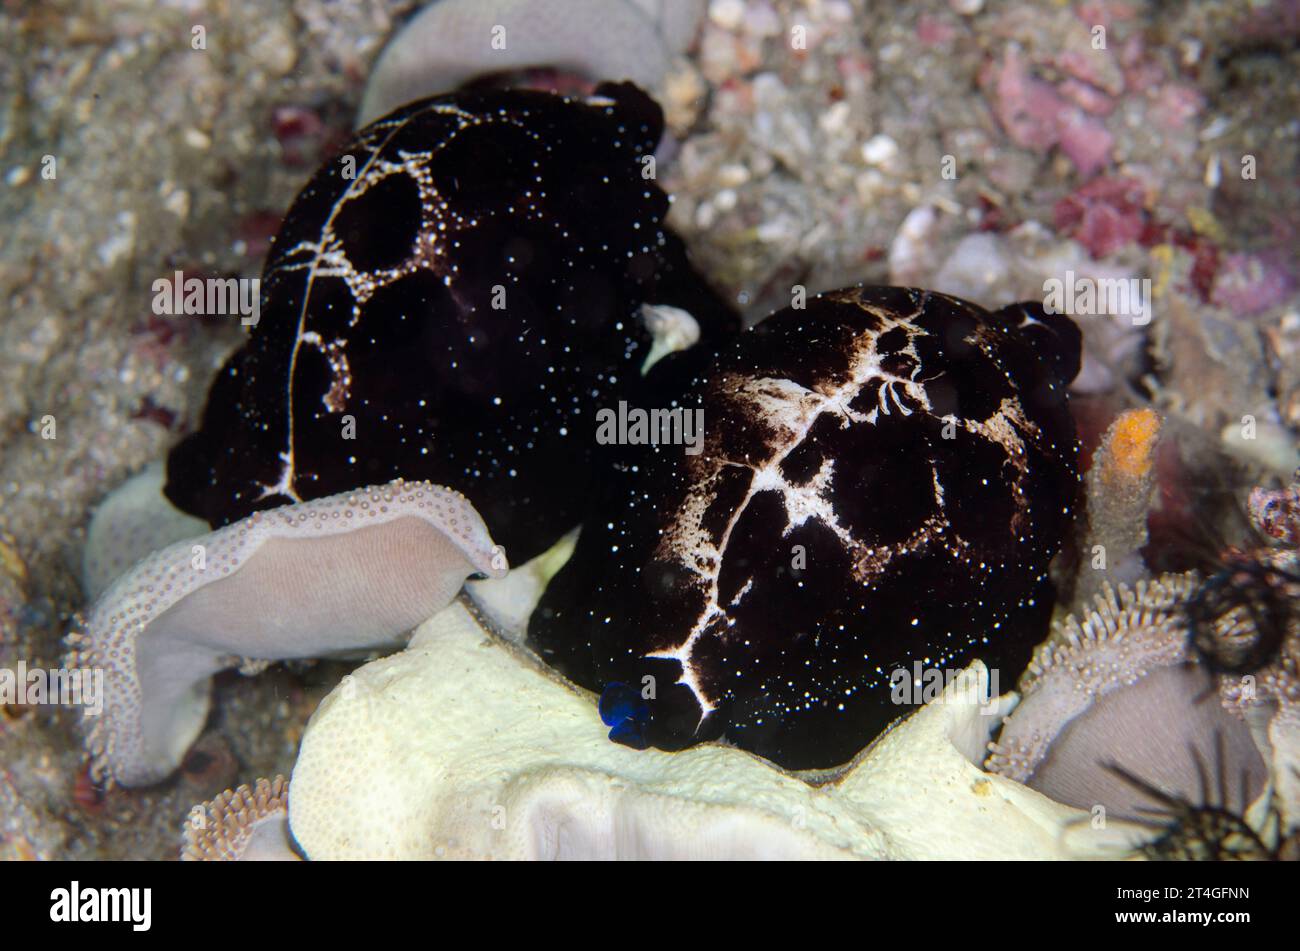 Pair of Egg Cowries, Ovula ovum, on Leather Coral, Alcyoniidae Family, night dive, Tanjung Slope dive site, Lembeh Straits, Sulawesi, Indonesia Stock Photo